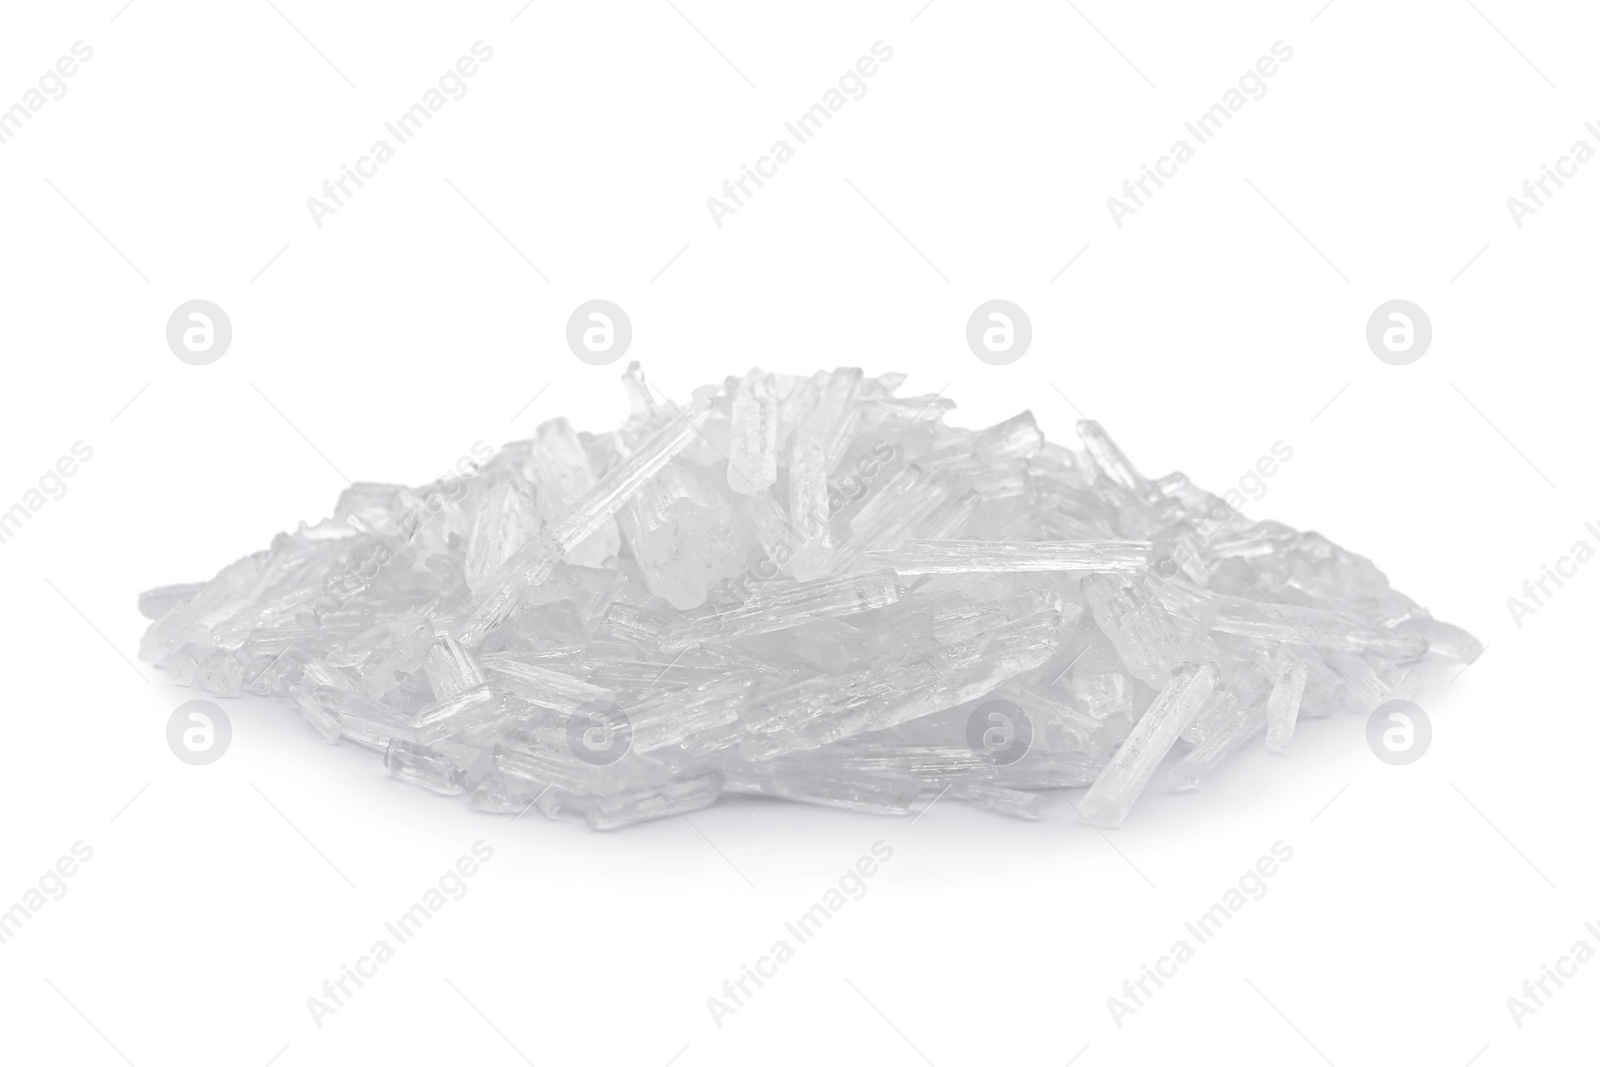 Photo of Heap of menthol crystals on white background